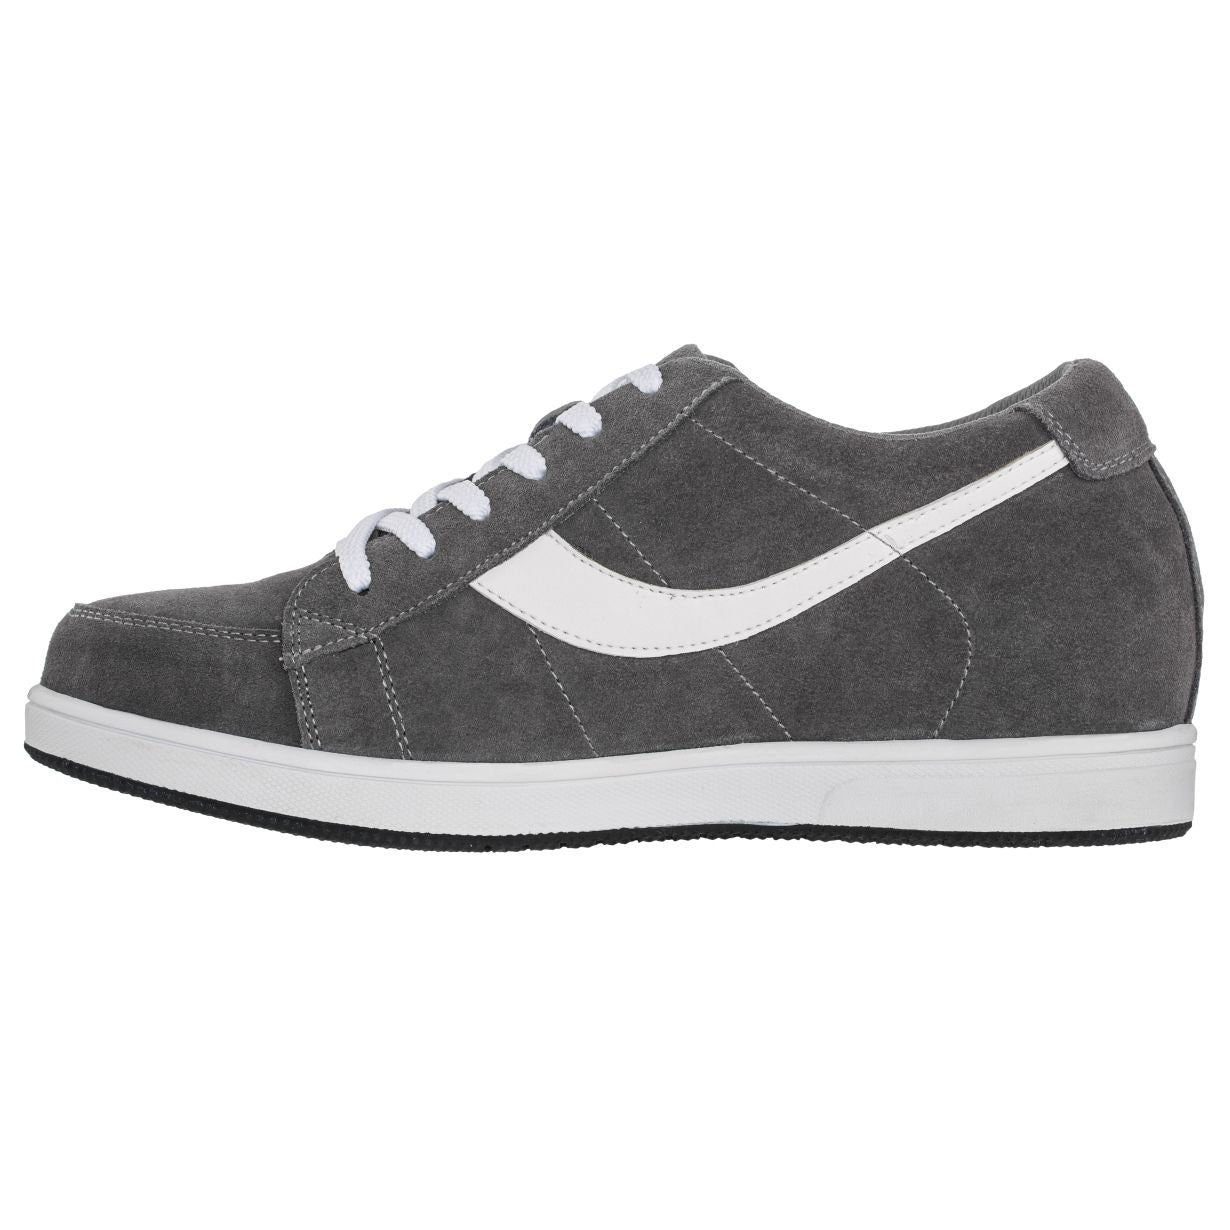 Elevator shoes height increase 2.8-Inch TOTO Gray & White Suede Leather Sneakers - A1911